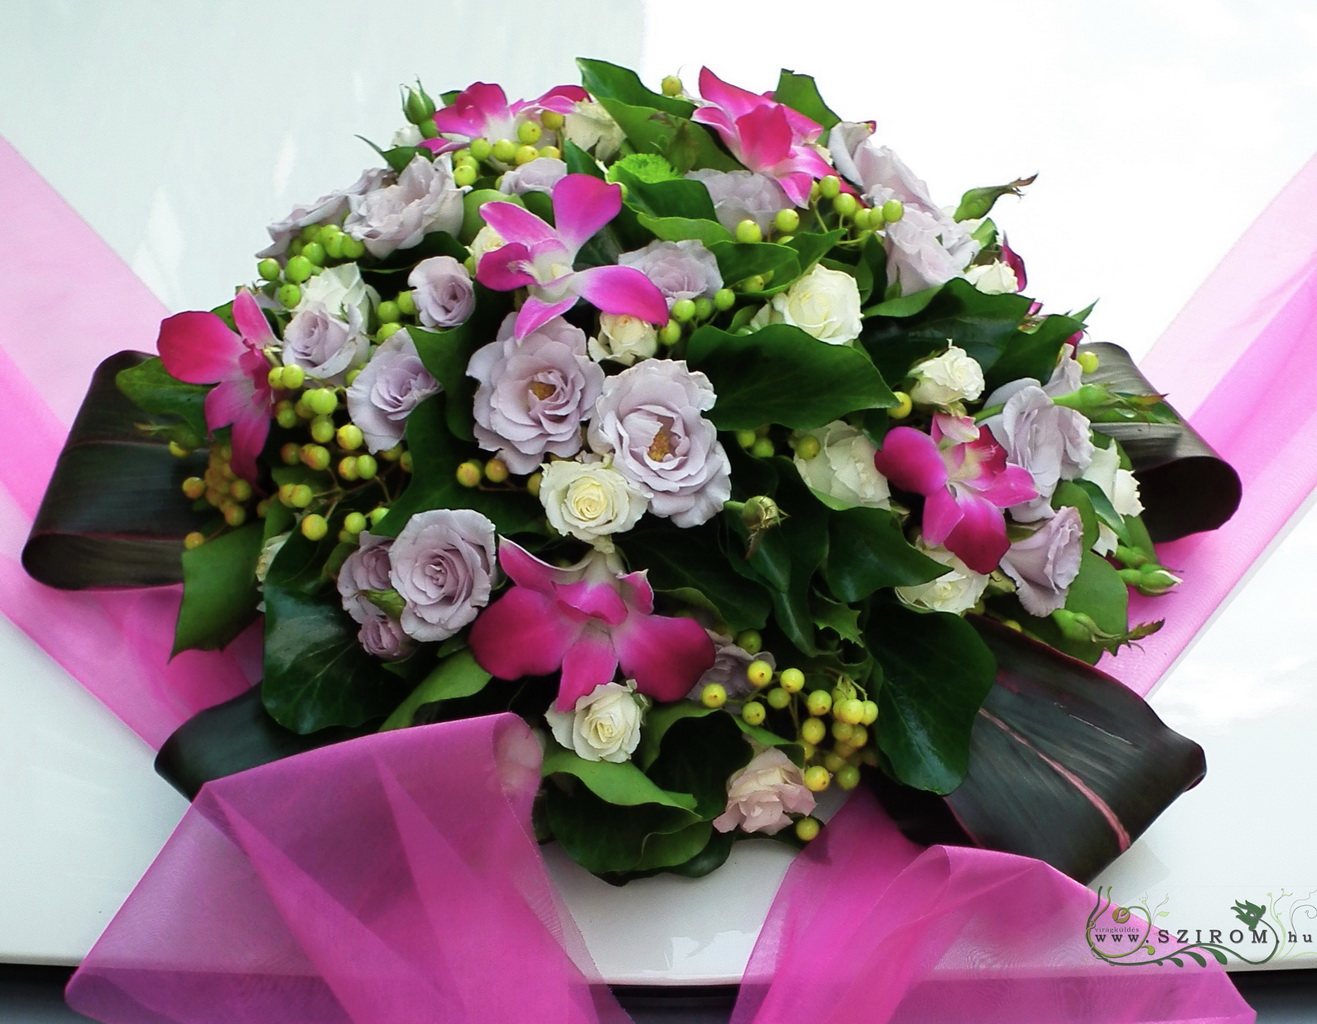 flower delivery Budapest - round car flower arrangement with spray roses and orchids, whith organsa decor (purple, pink)